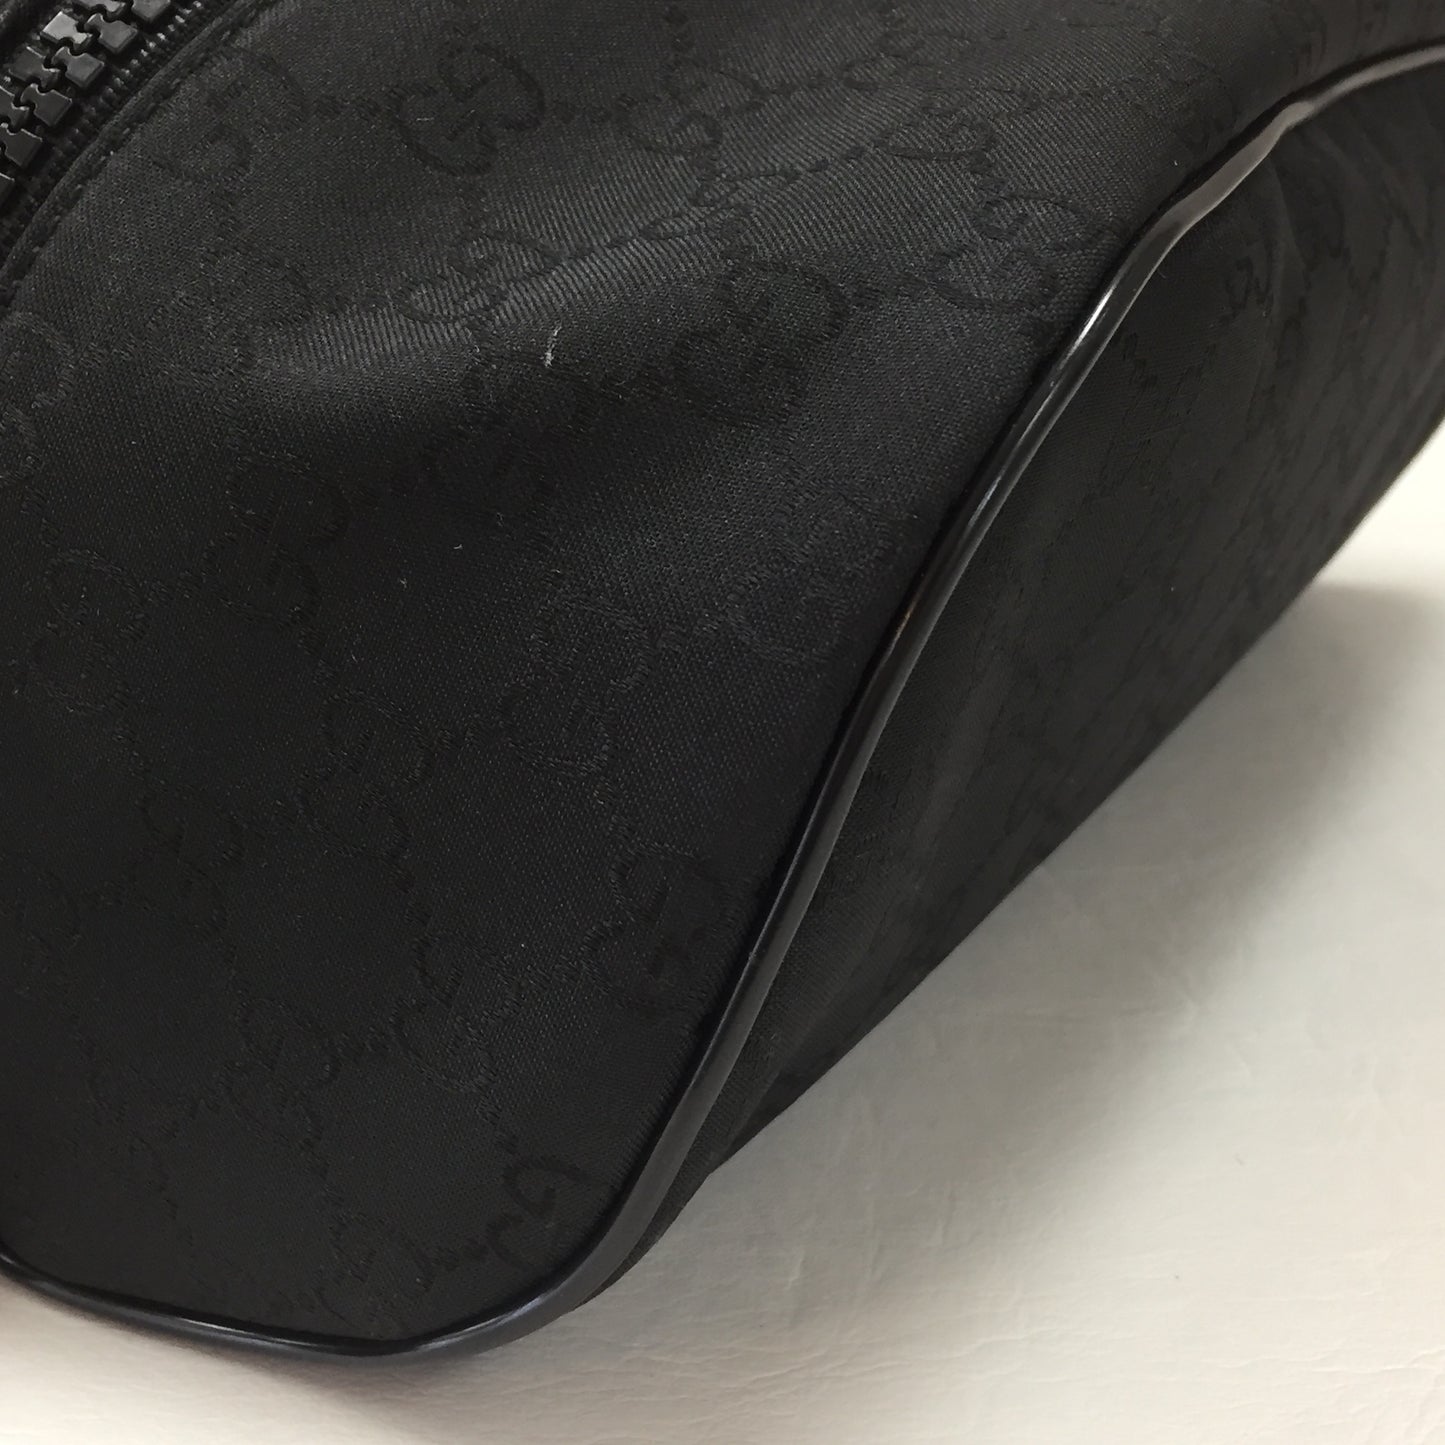 Authentic Gucci Black Nylon Fanny Pack/Bumbag